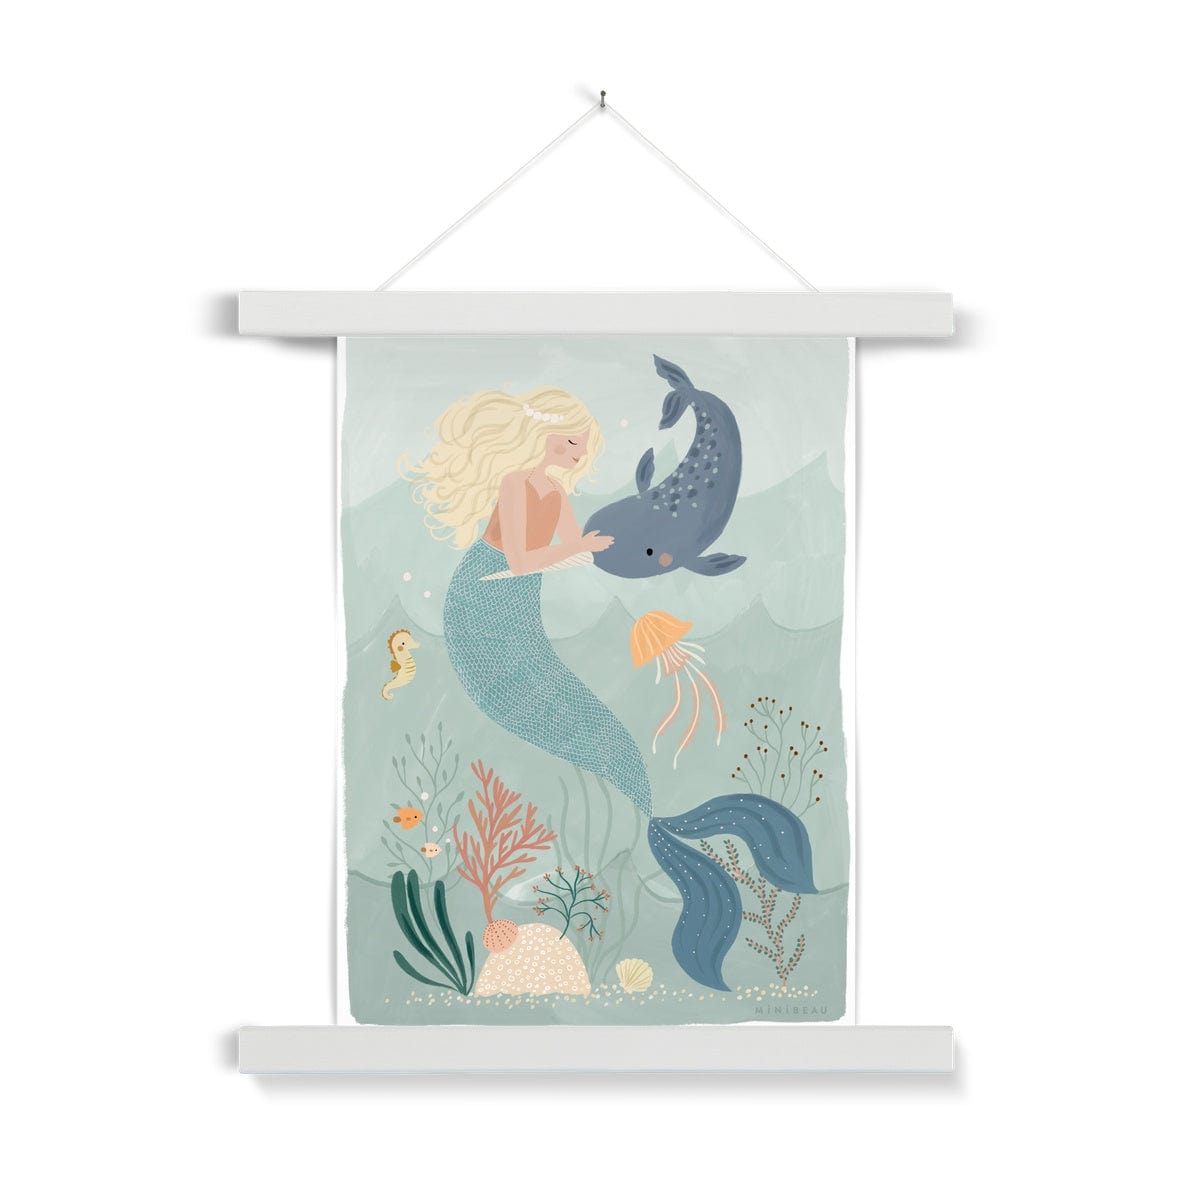 Picture of a hand-painted picture depicting Coral the Mermaid petting a Narwhal at the bottom of the sea. Coral is blonde and wearing an orange top and her tail is a deep teal. She is wearing a pearl headband. In the background are 2 small angel fish, a sea horse and a jellyfish amongst sea foliage with a white border, in a white hanger, hanging from a nail